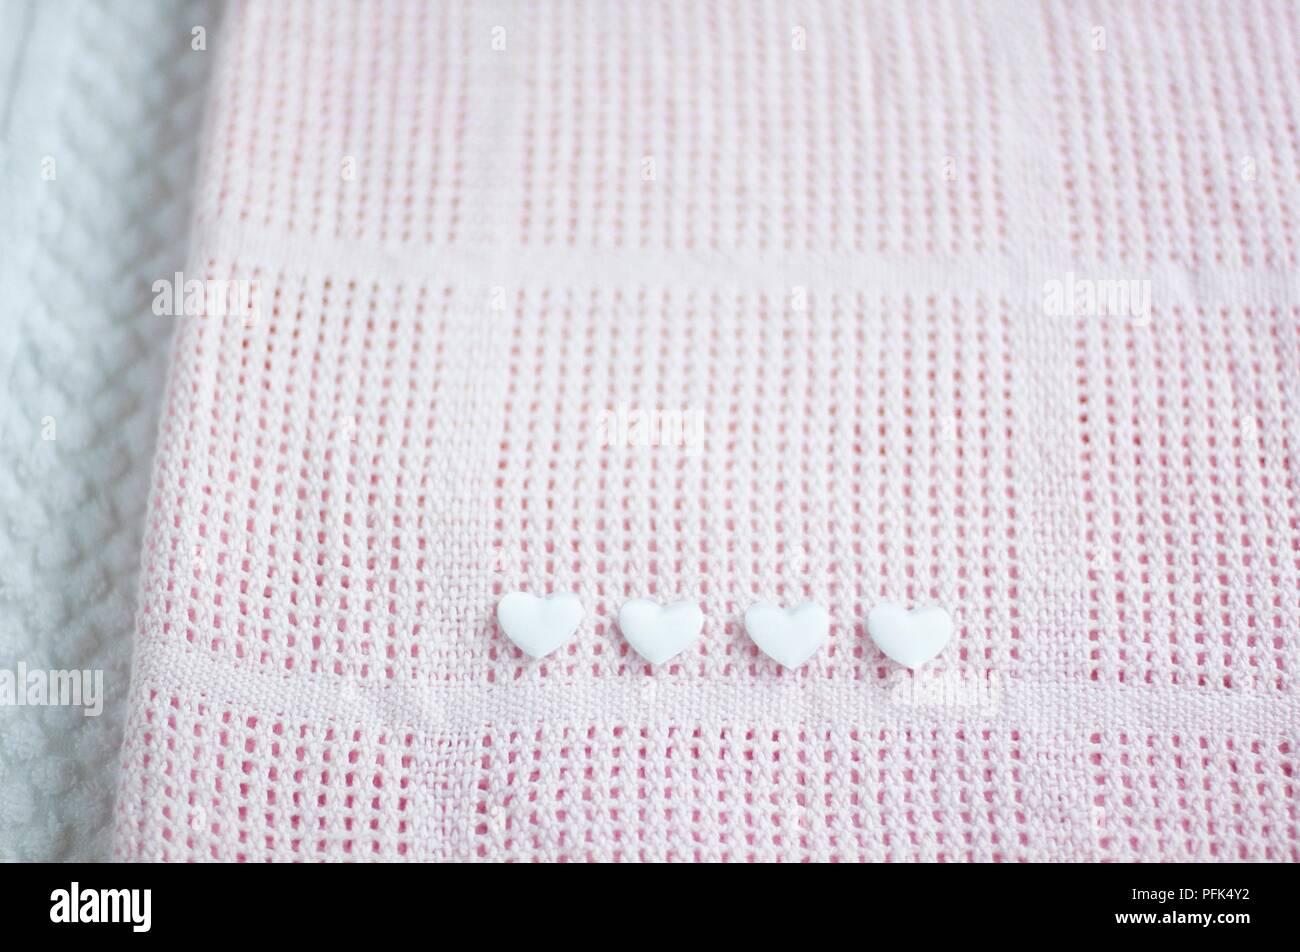 Four white hearts on pink cellular blanket, close-up Stock Photo